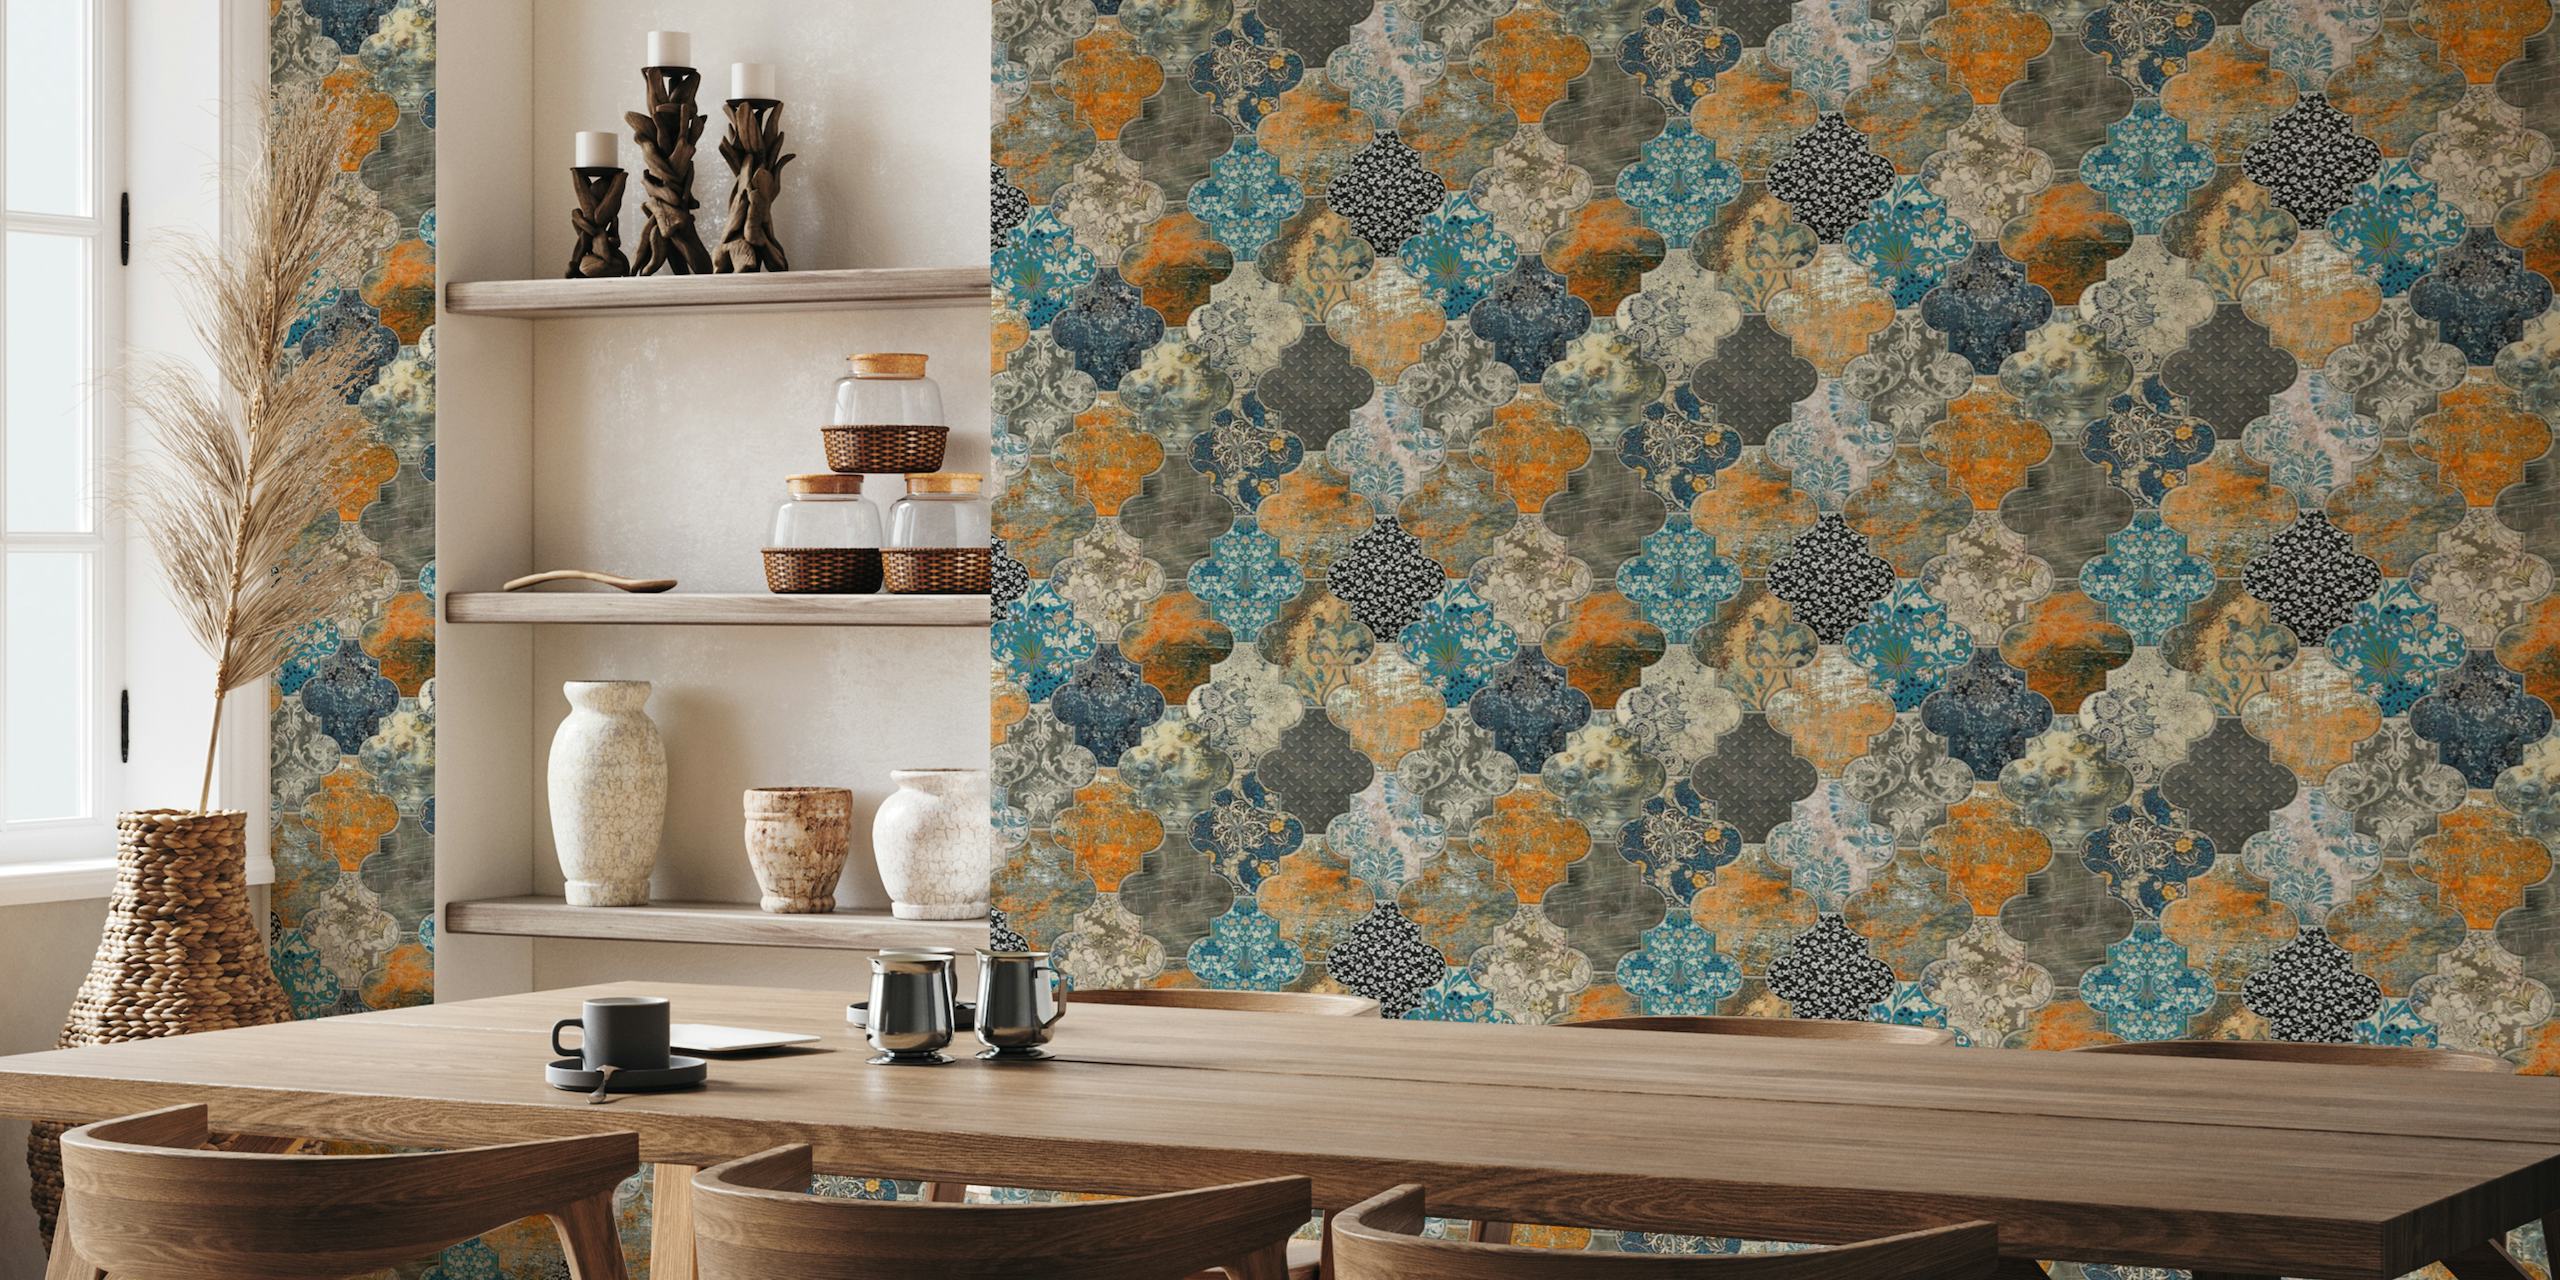 Moroccan Tiles Wall Mural in Orange and Blue with Large Pattern Design